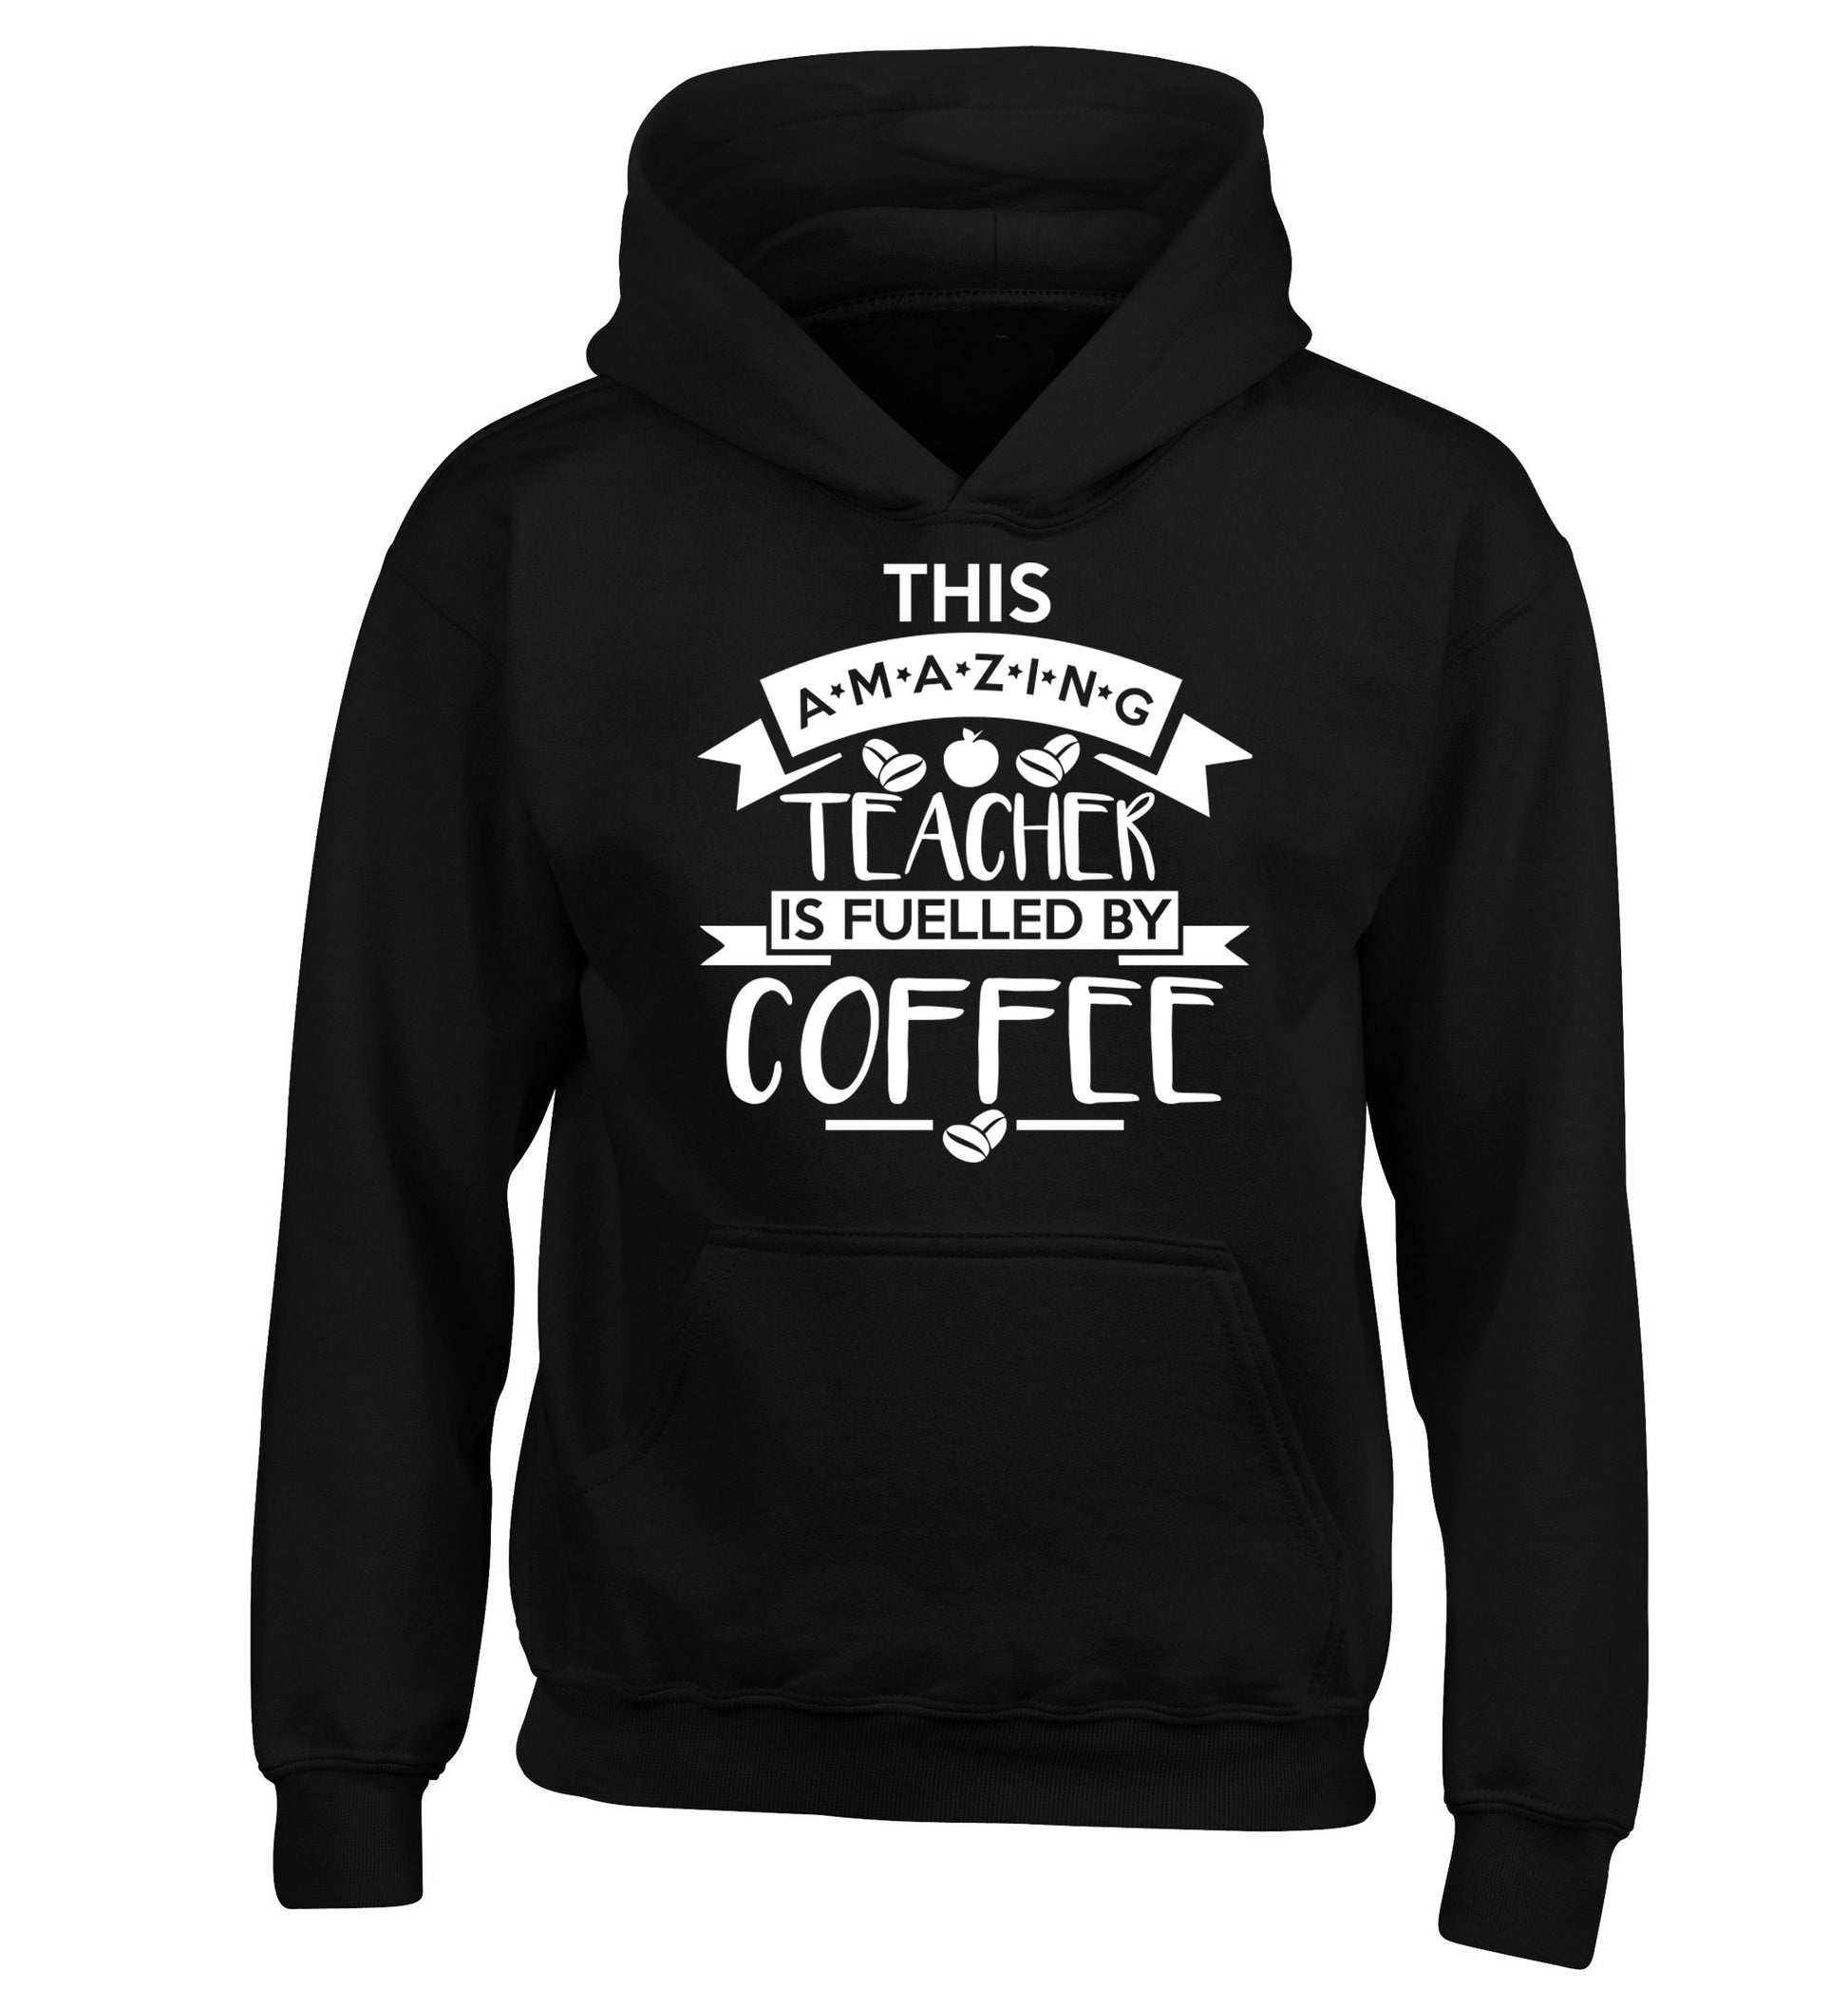 This amazing teacher is fuelled by coffee children's black hoodie 12-13 Years